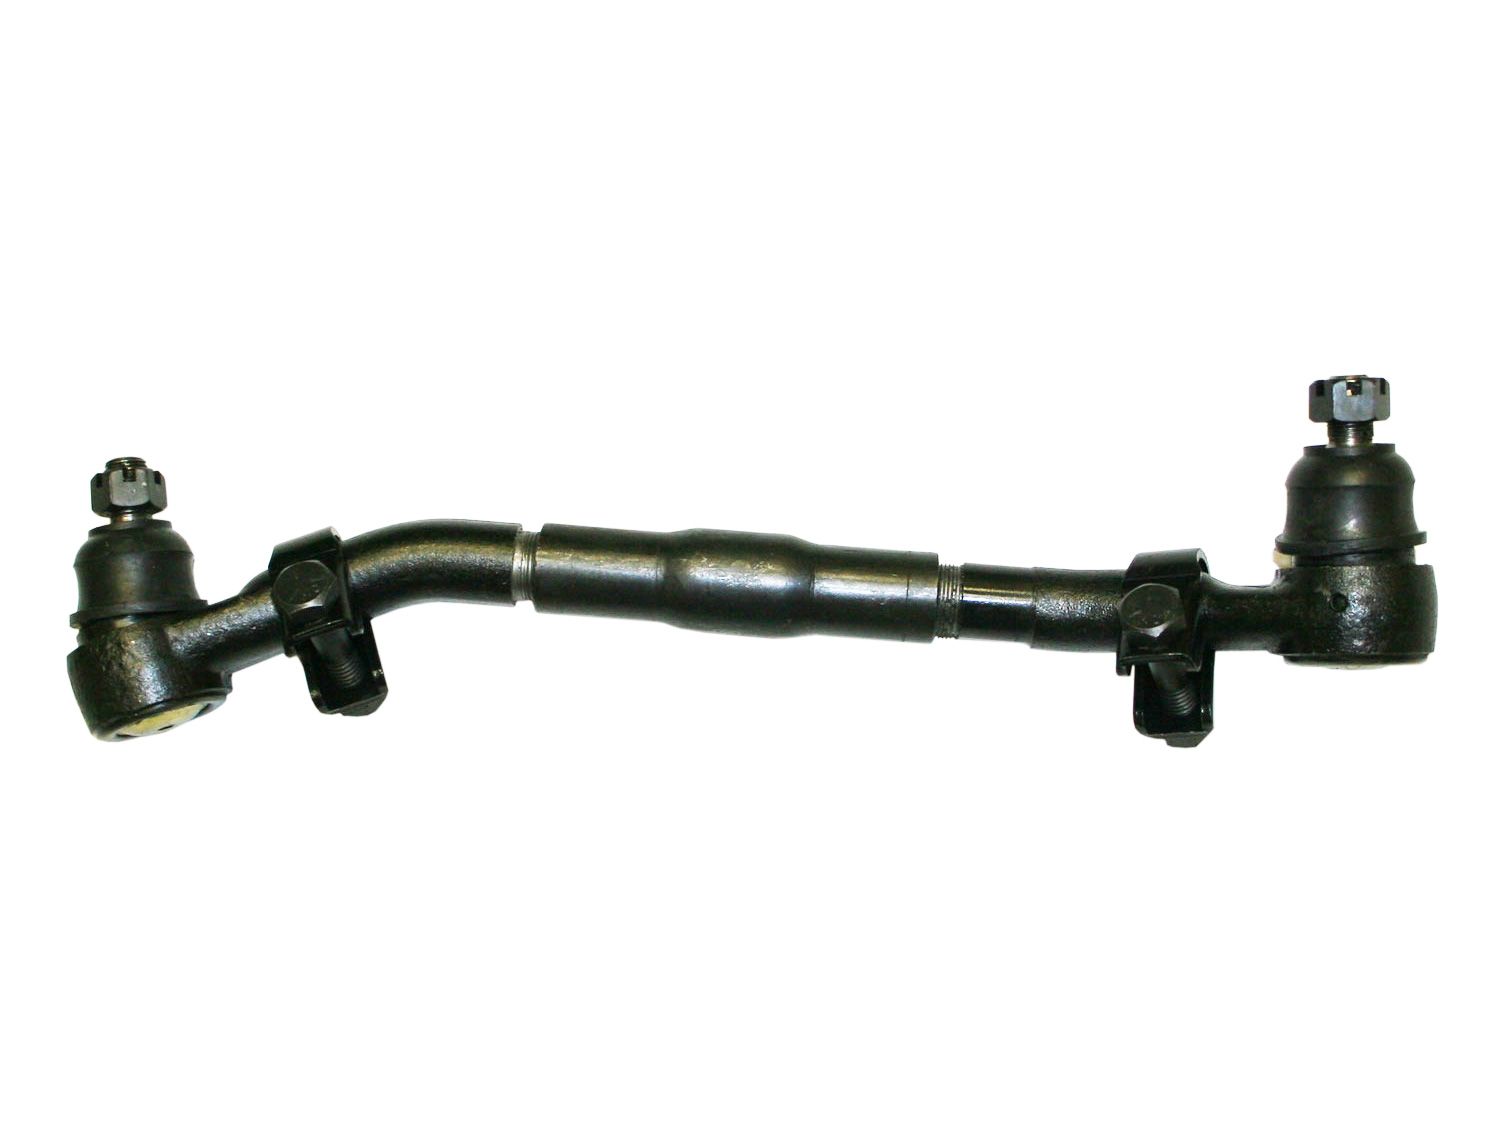 Pickup 1/2 ton, 3/4 ton and 1 ton 1972-1993 Dodge 4WD - Adjustable Drag Link by Skyjacker